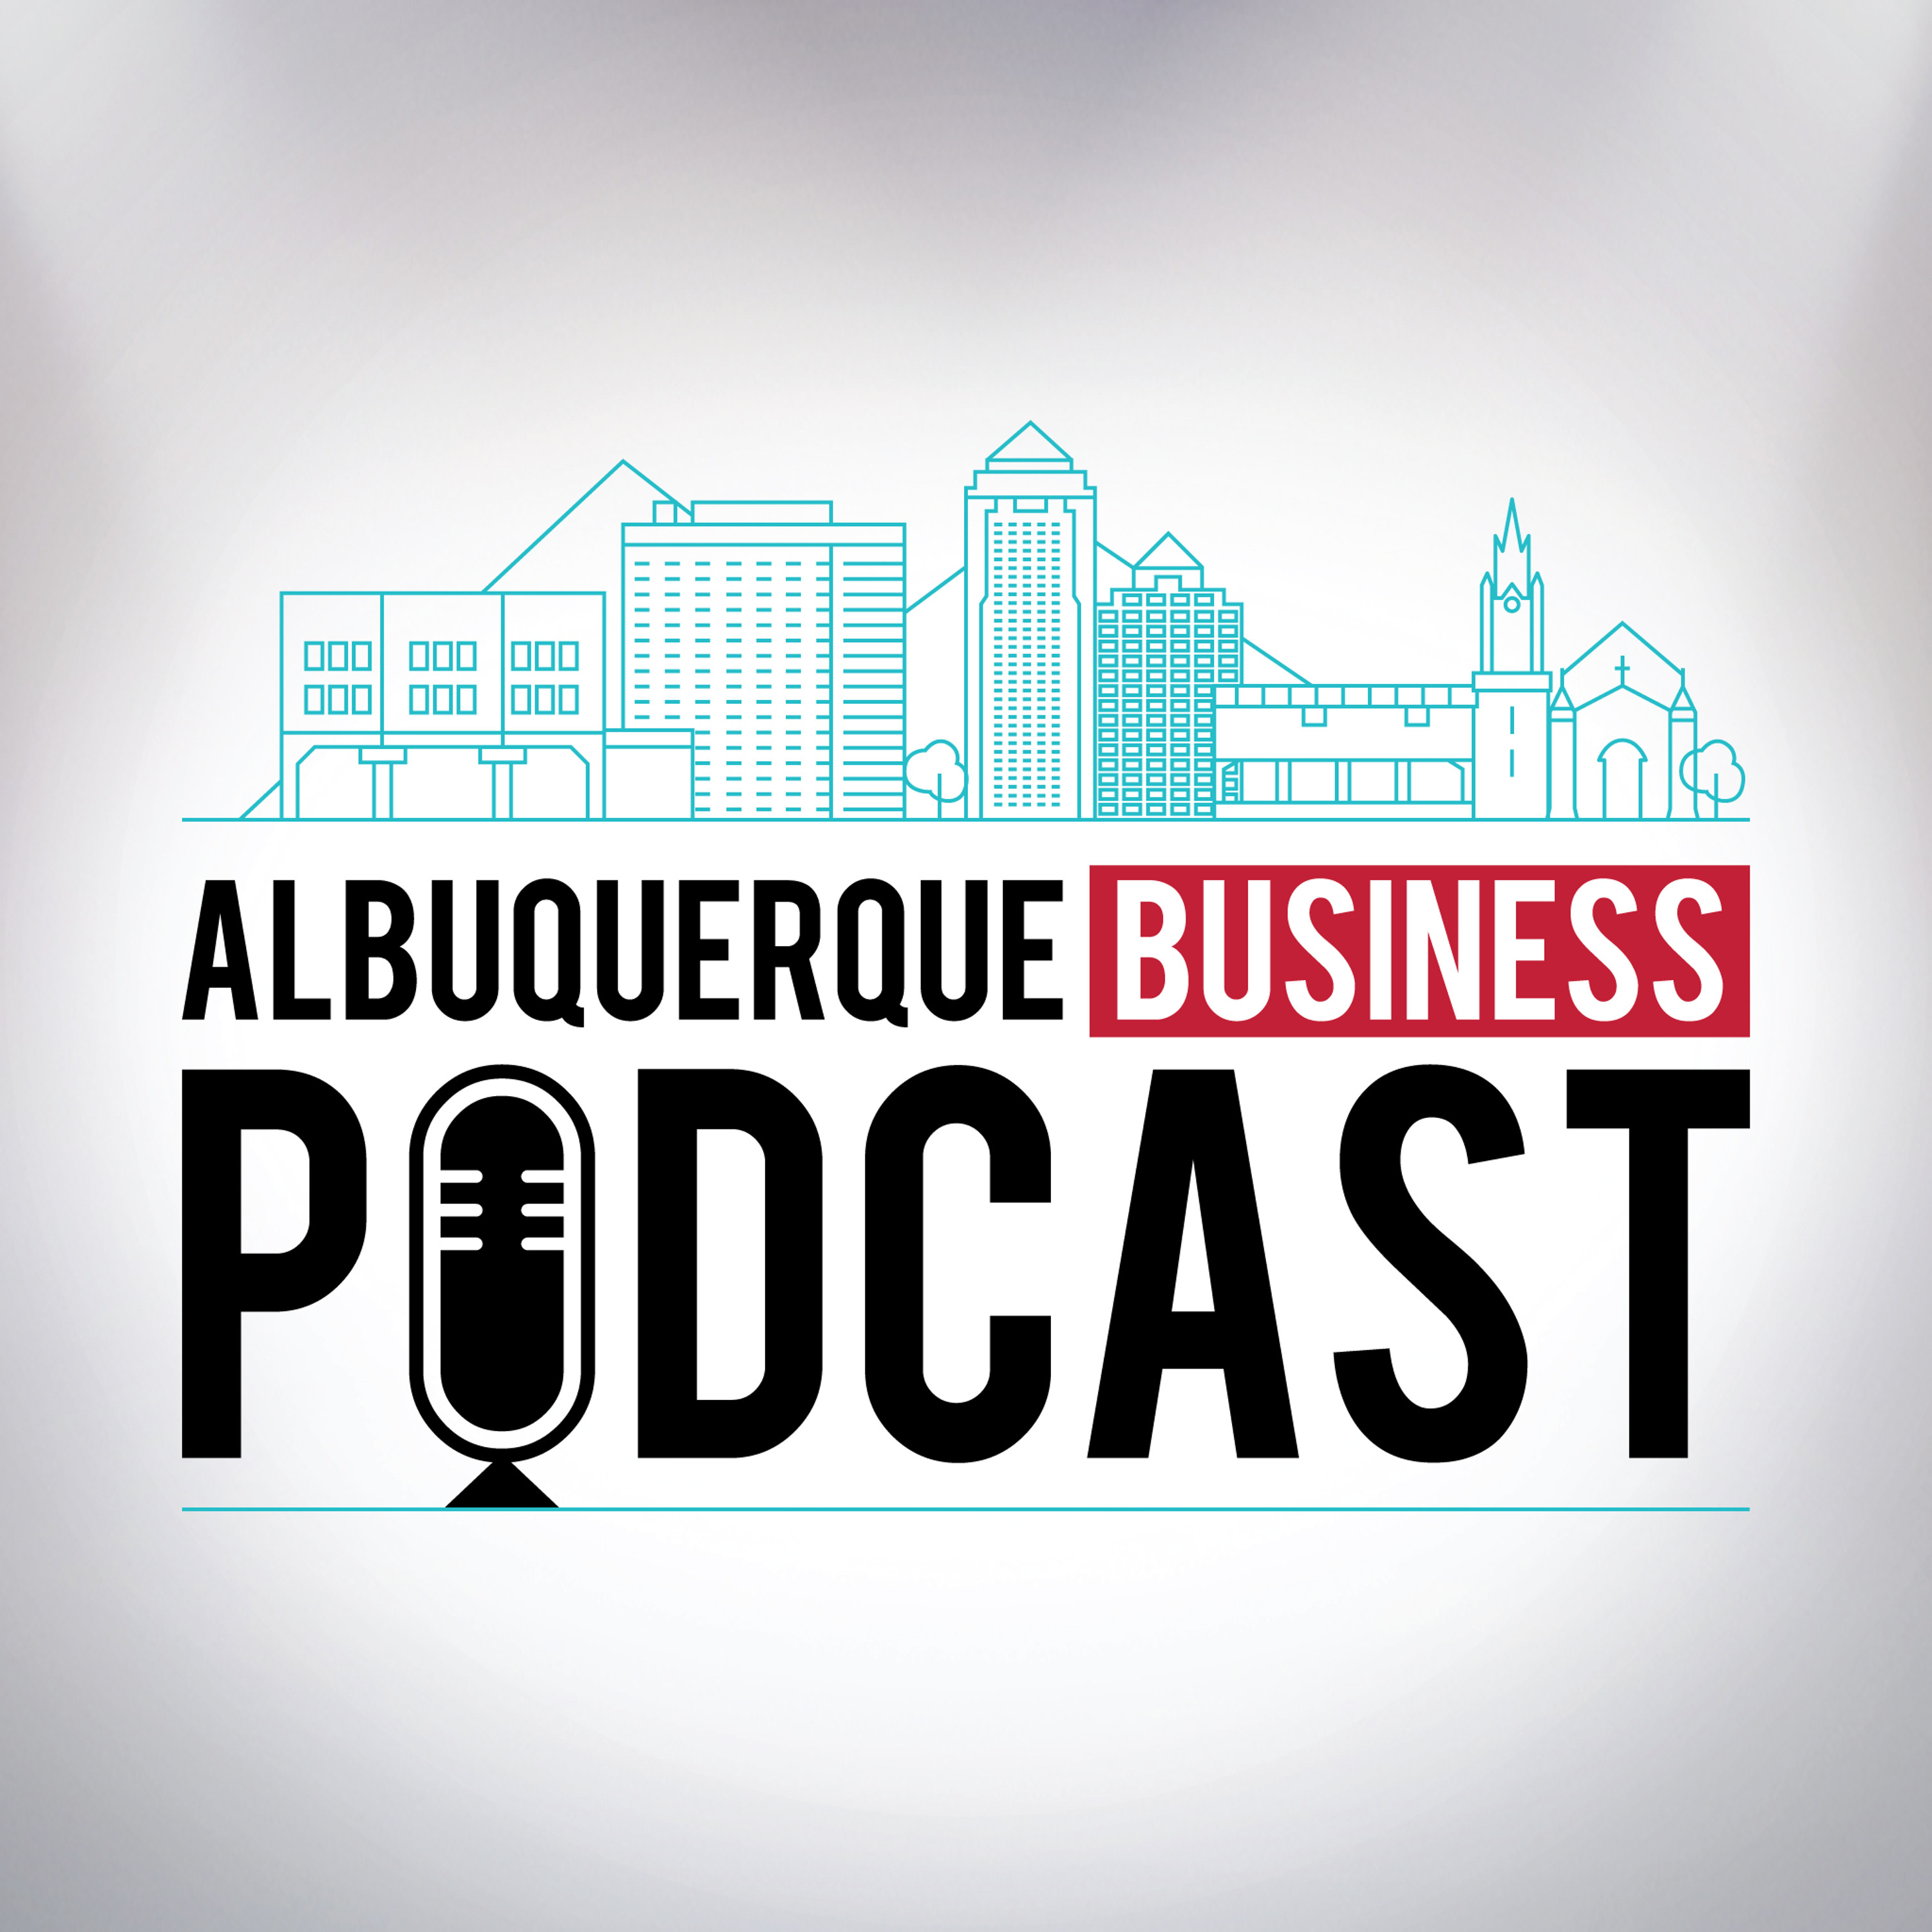 Albuquerque Business Podcast with Bestselling Author Keith Rosen